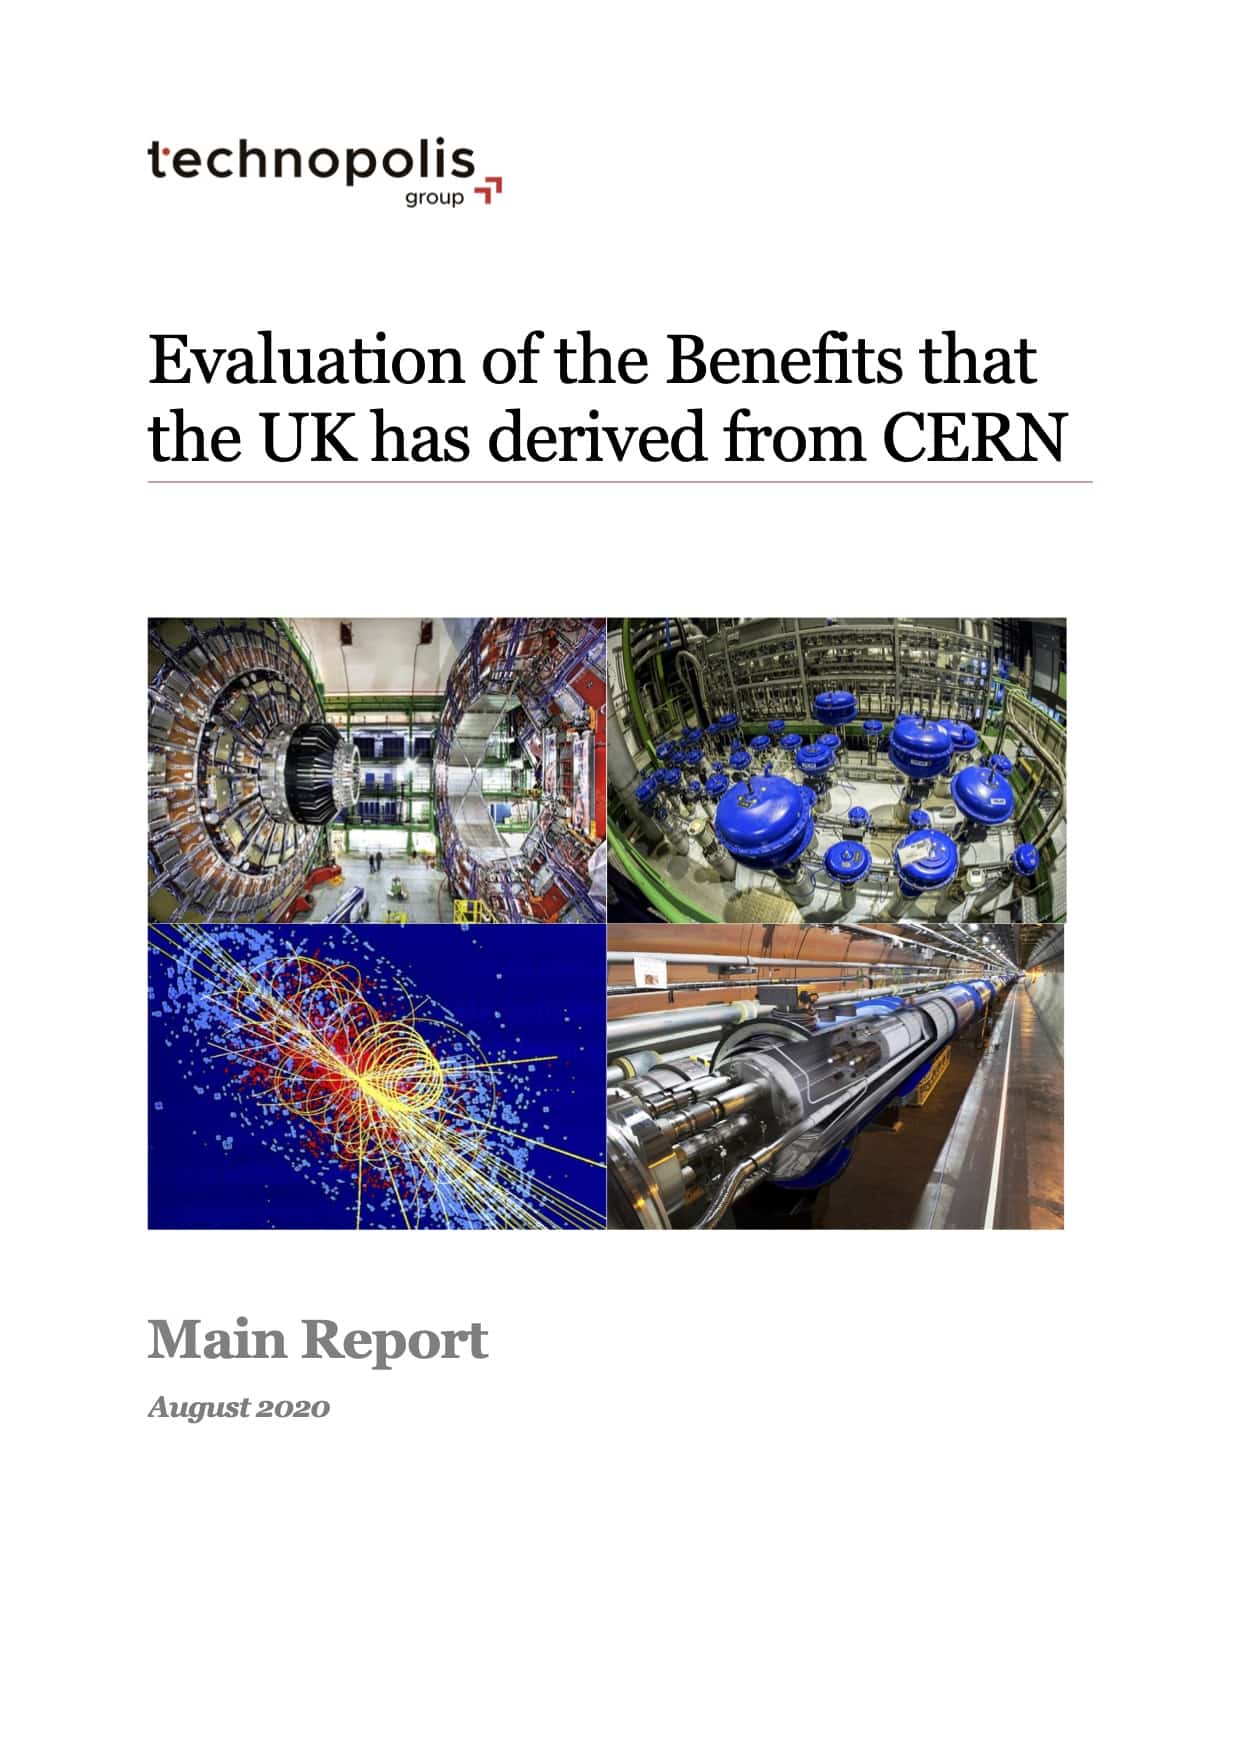 Evaluation of the Benefits that the UK has derived from CERN